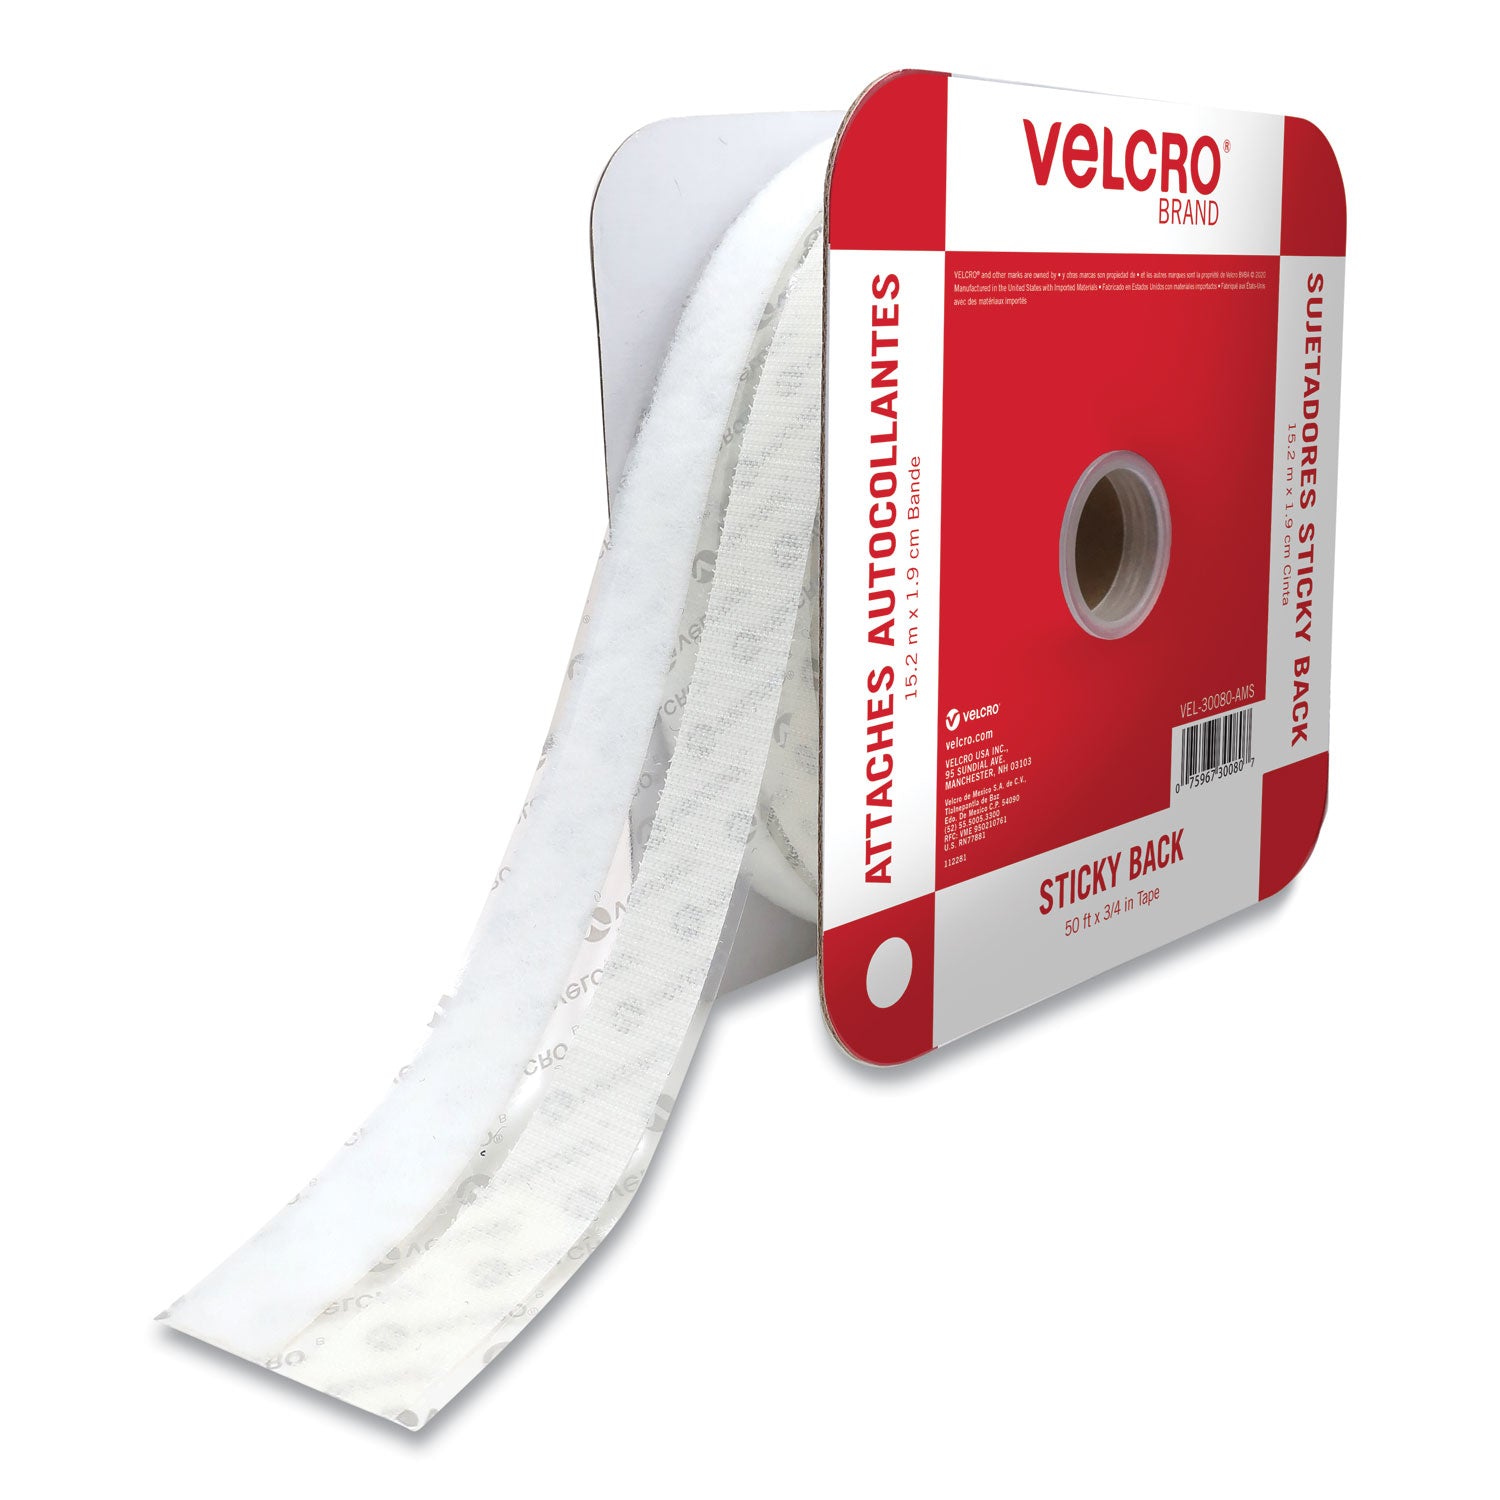 VELCRO Sticky Back Fasteners - 16.67 yd Length x 0.75" Width - 1 / Roll - White - 1